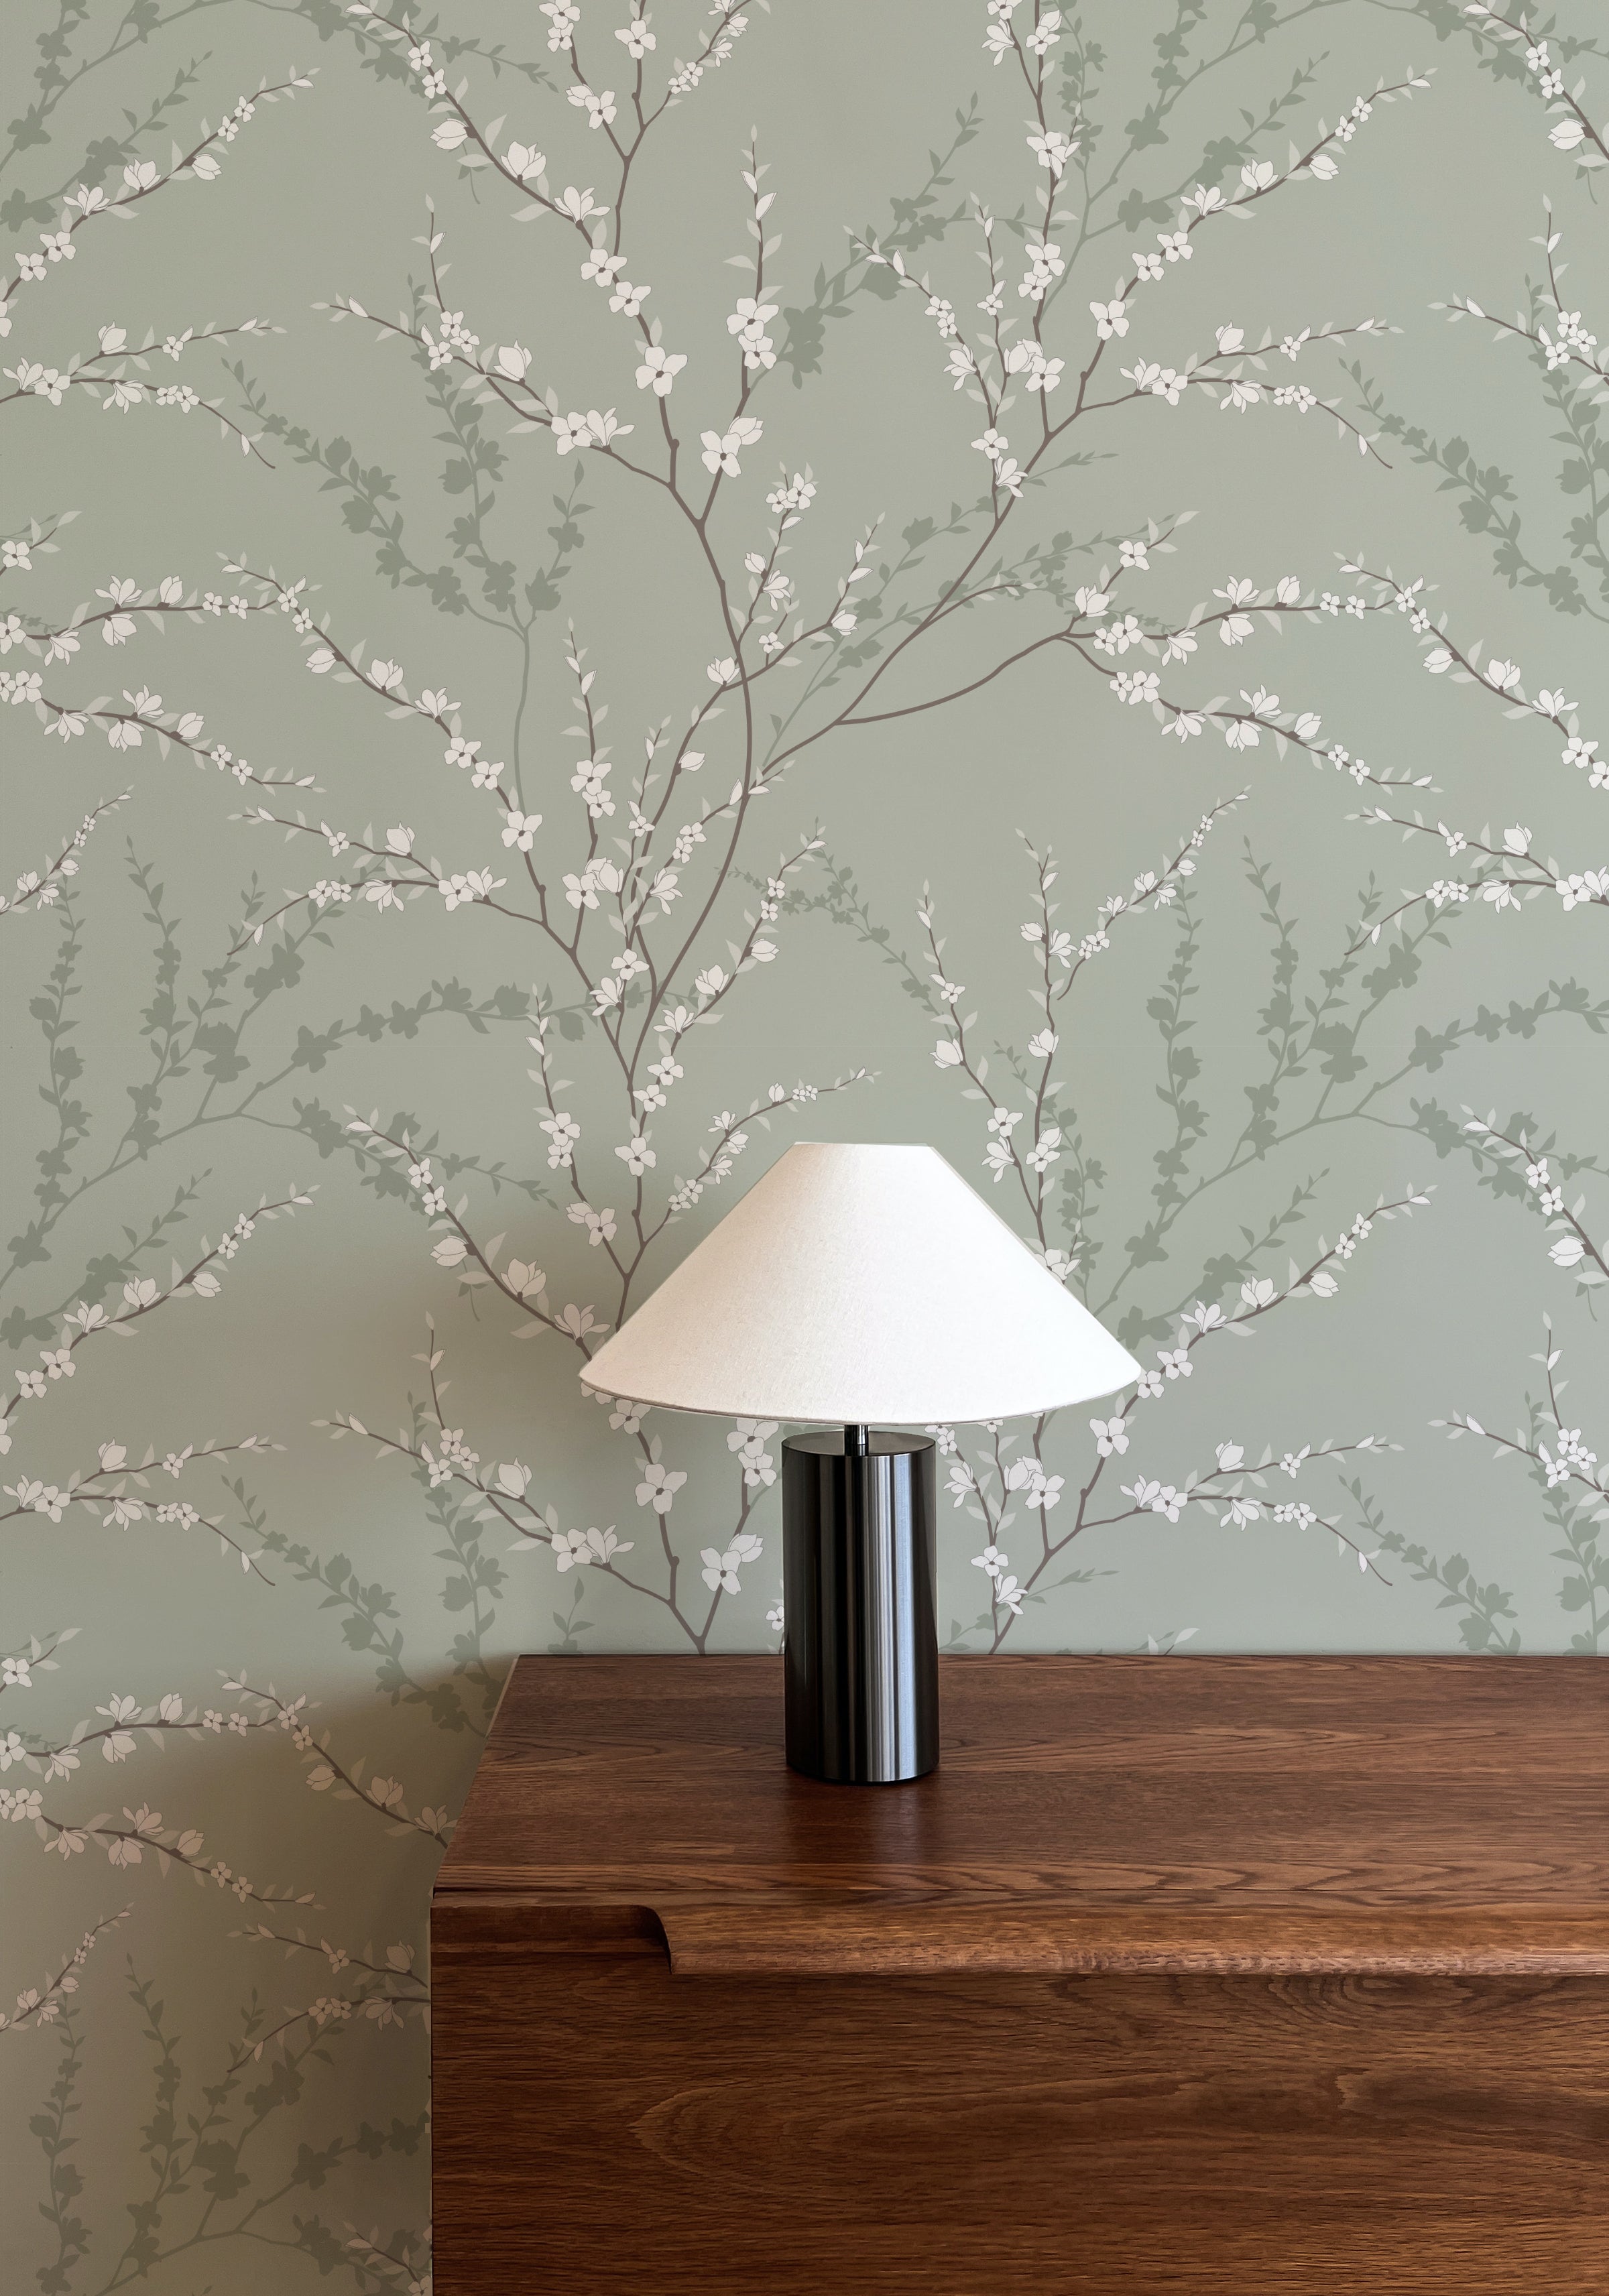 A chic table lamp stands against the Enchanted Blossoms Wallpaper, with its soft green hues and white flowers complementing the lamp's simple elegance, creating a harmonious blend of modern design and natural beauty.